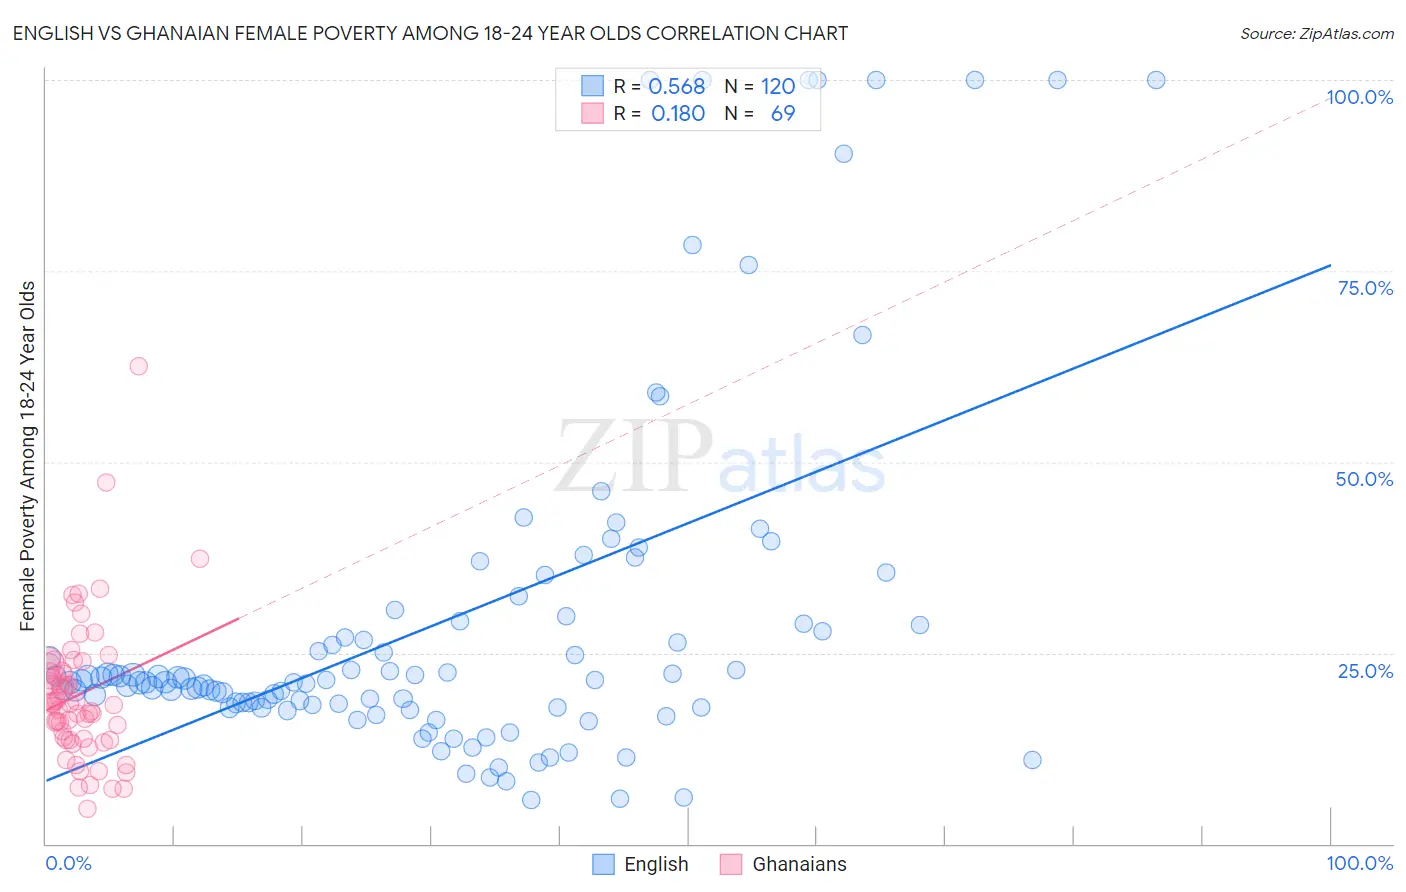 English vs Ghanaian Female Poverty Among 18-24 Year Olds